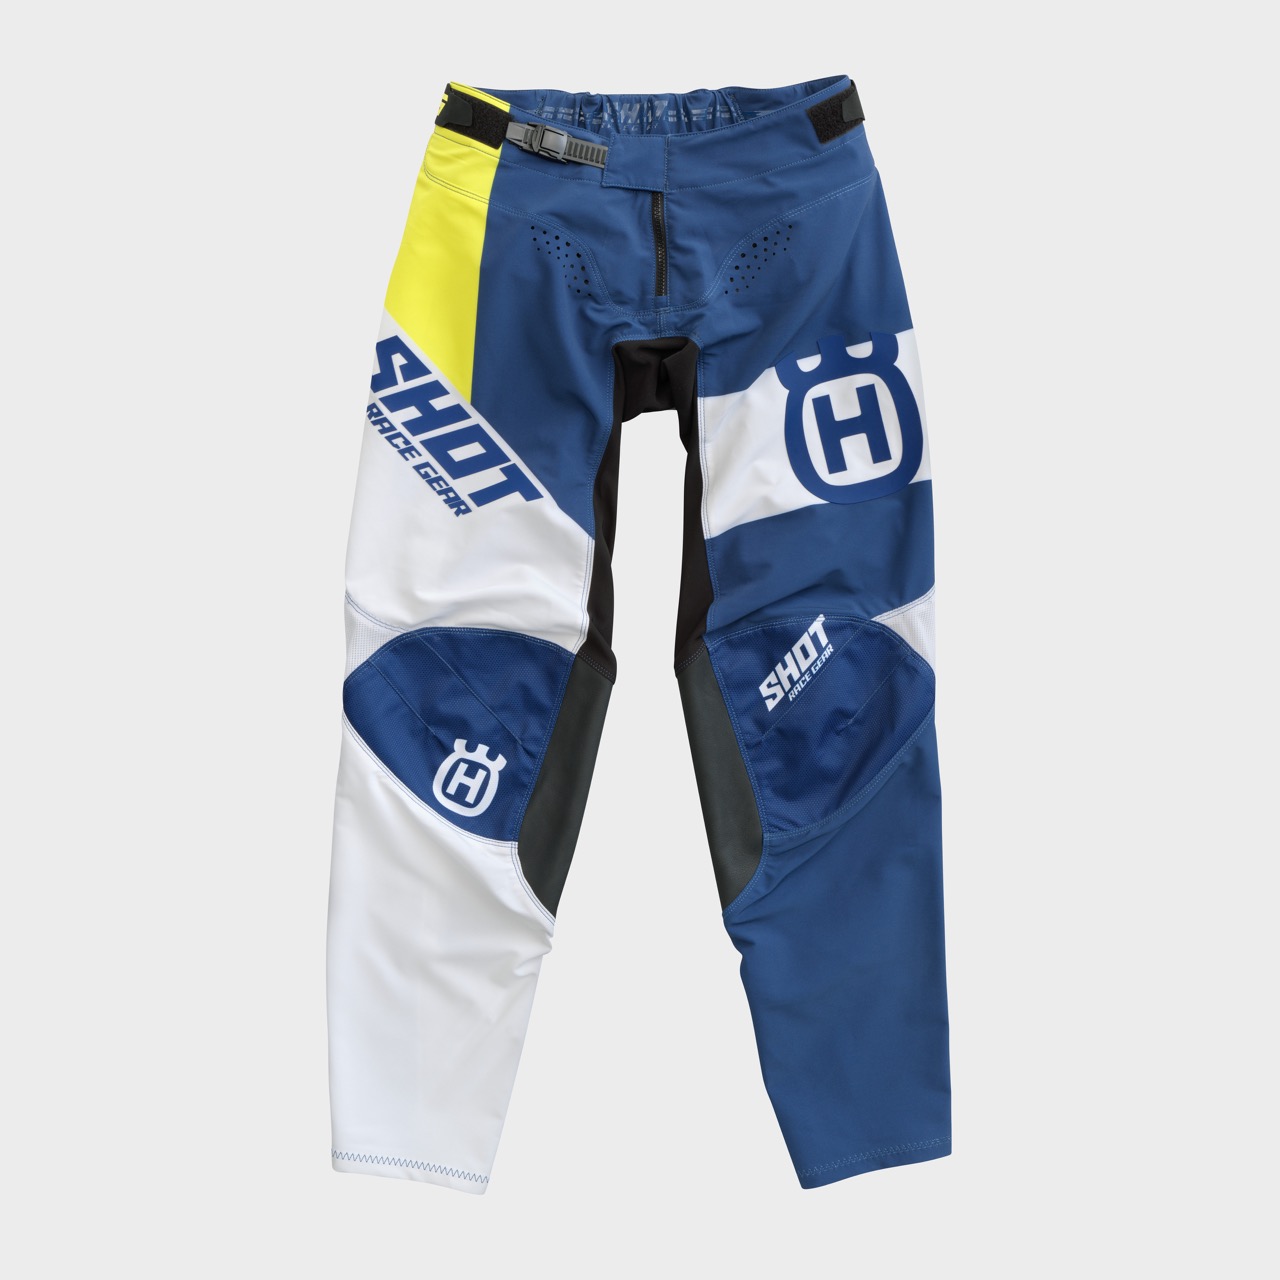 Husqvarna Motorcycles - Factory Replica 2020 collection by Shot